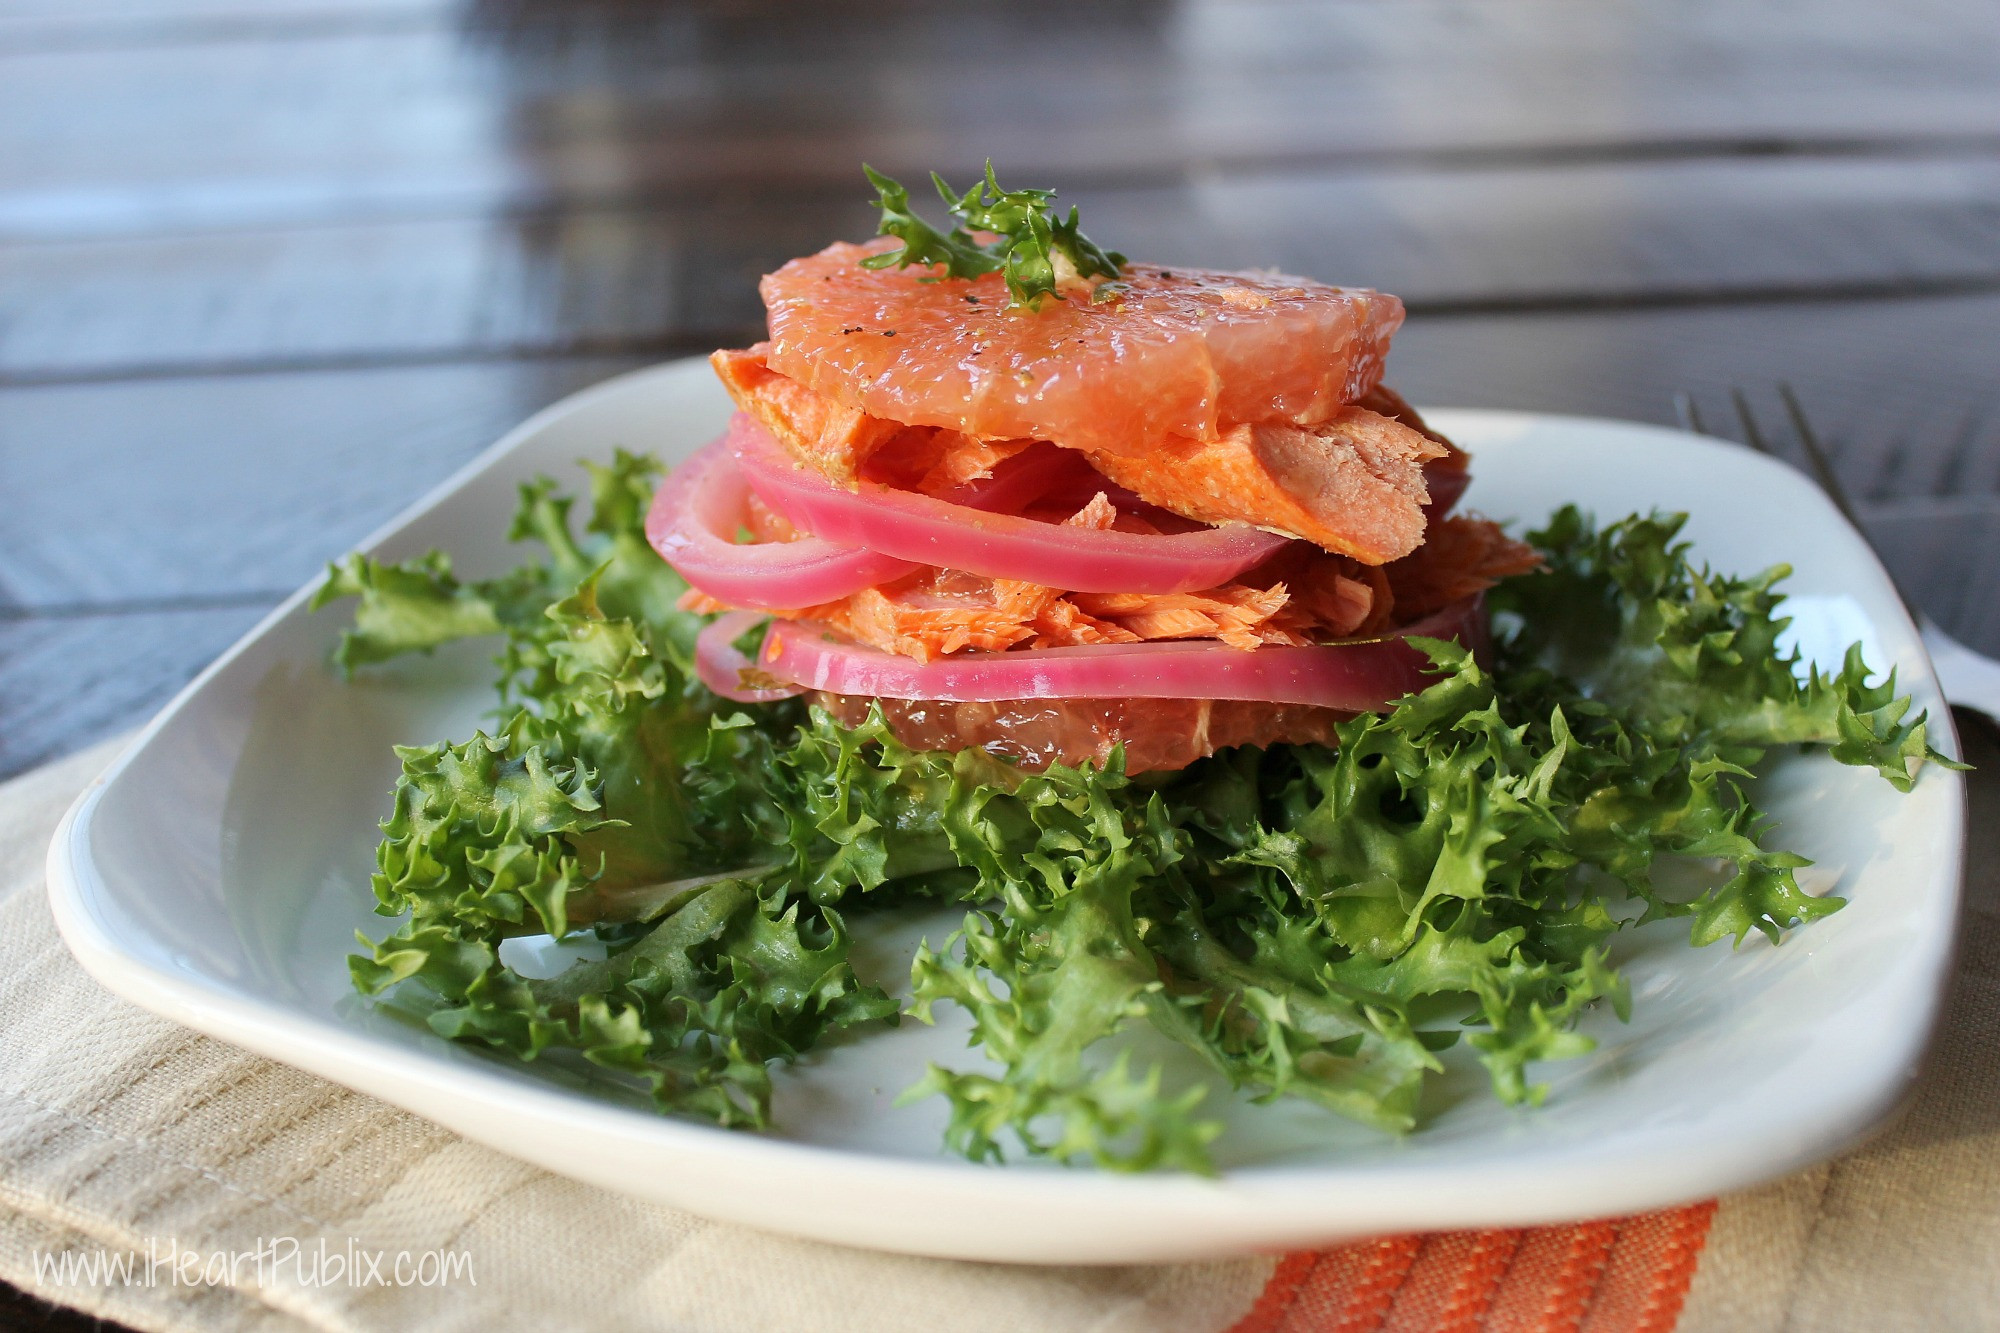 Smoked Salmon Publix
 Florida Grapefruit And Smoked Salmon Tower With Pickled